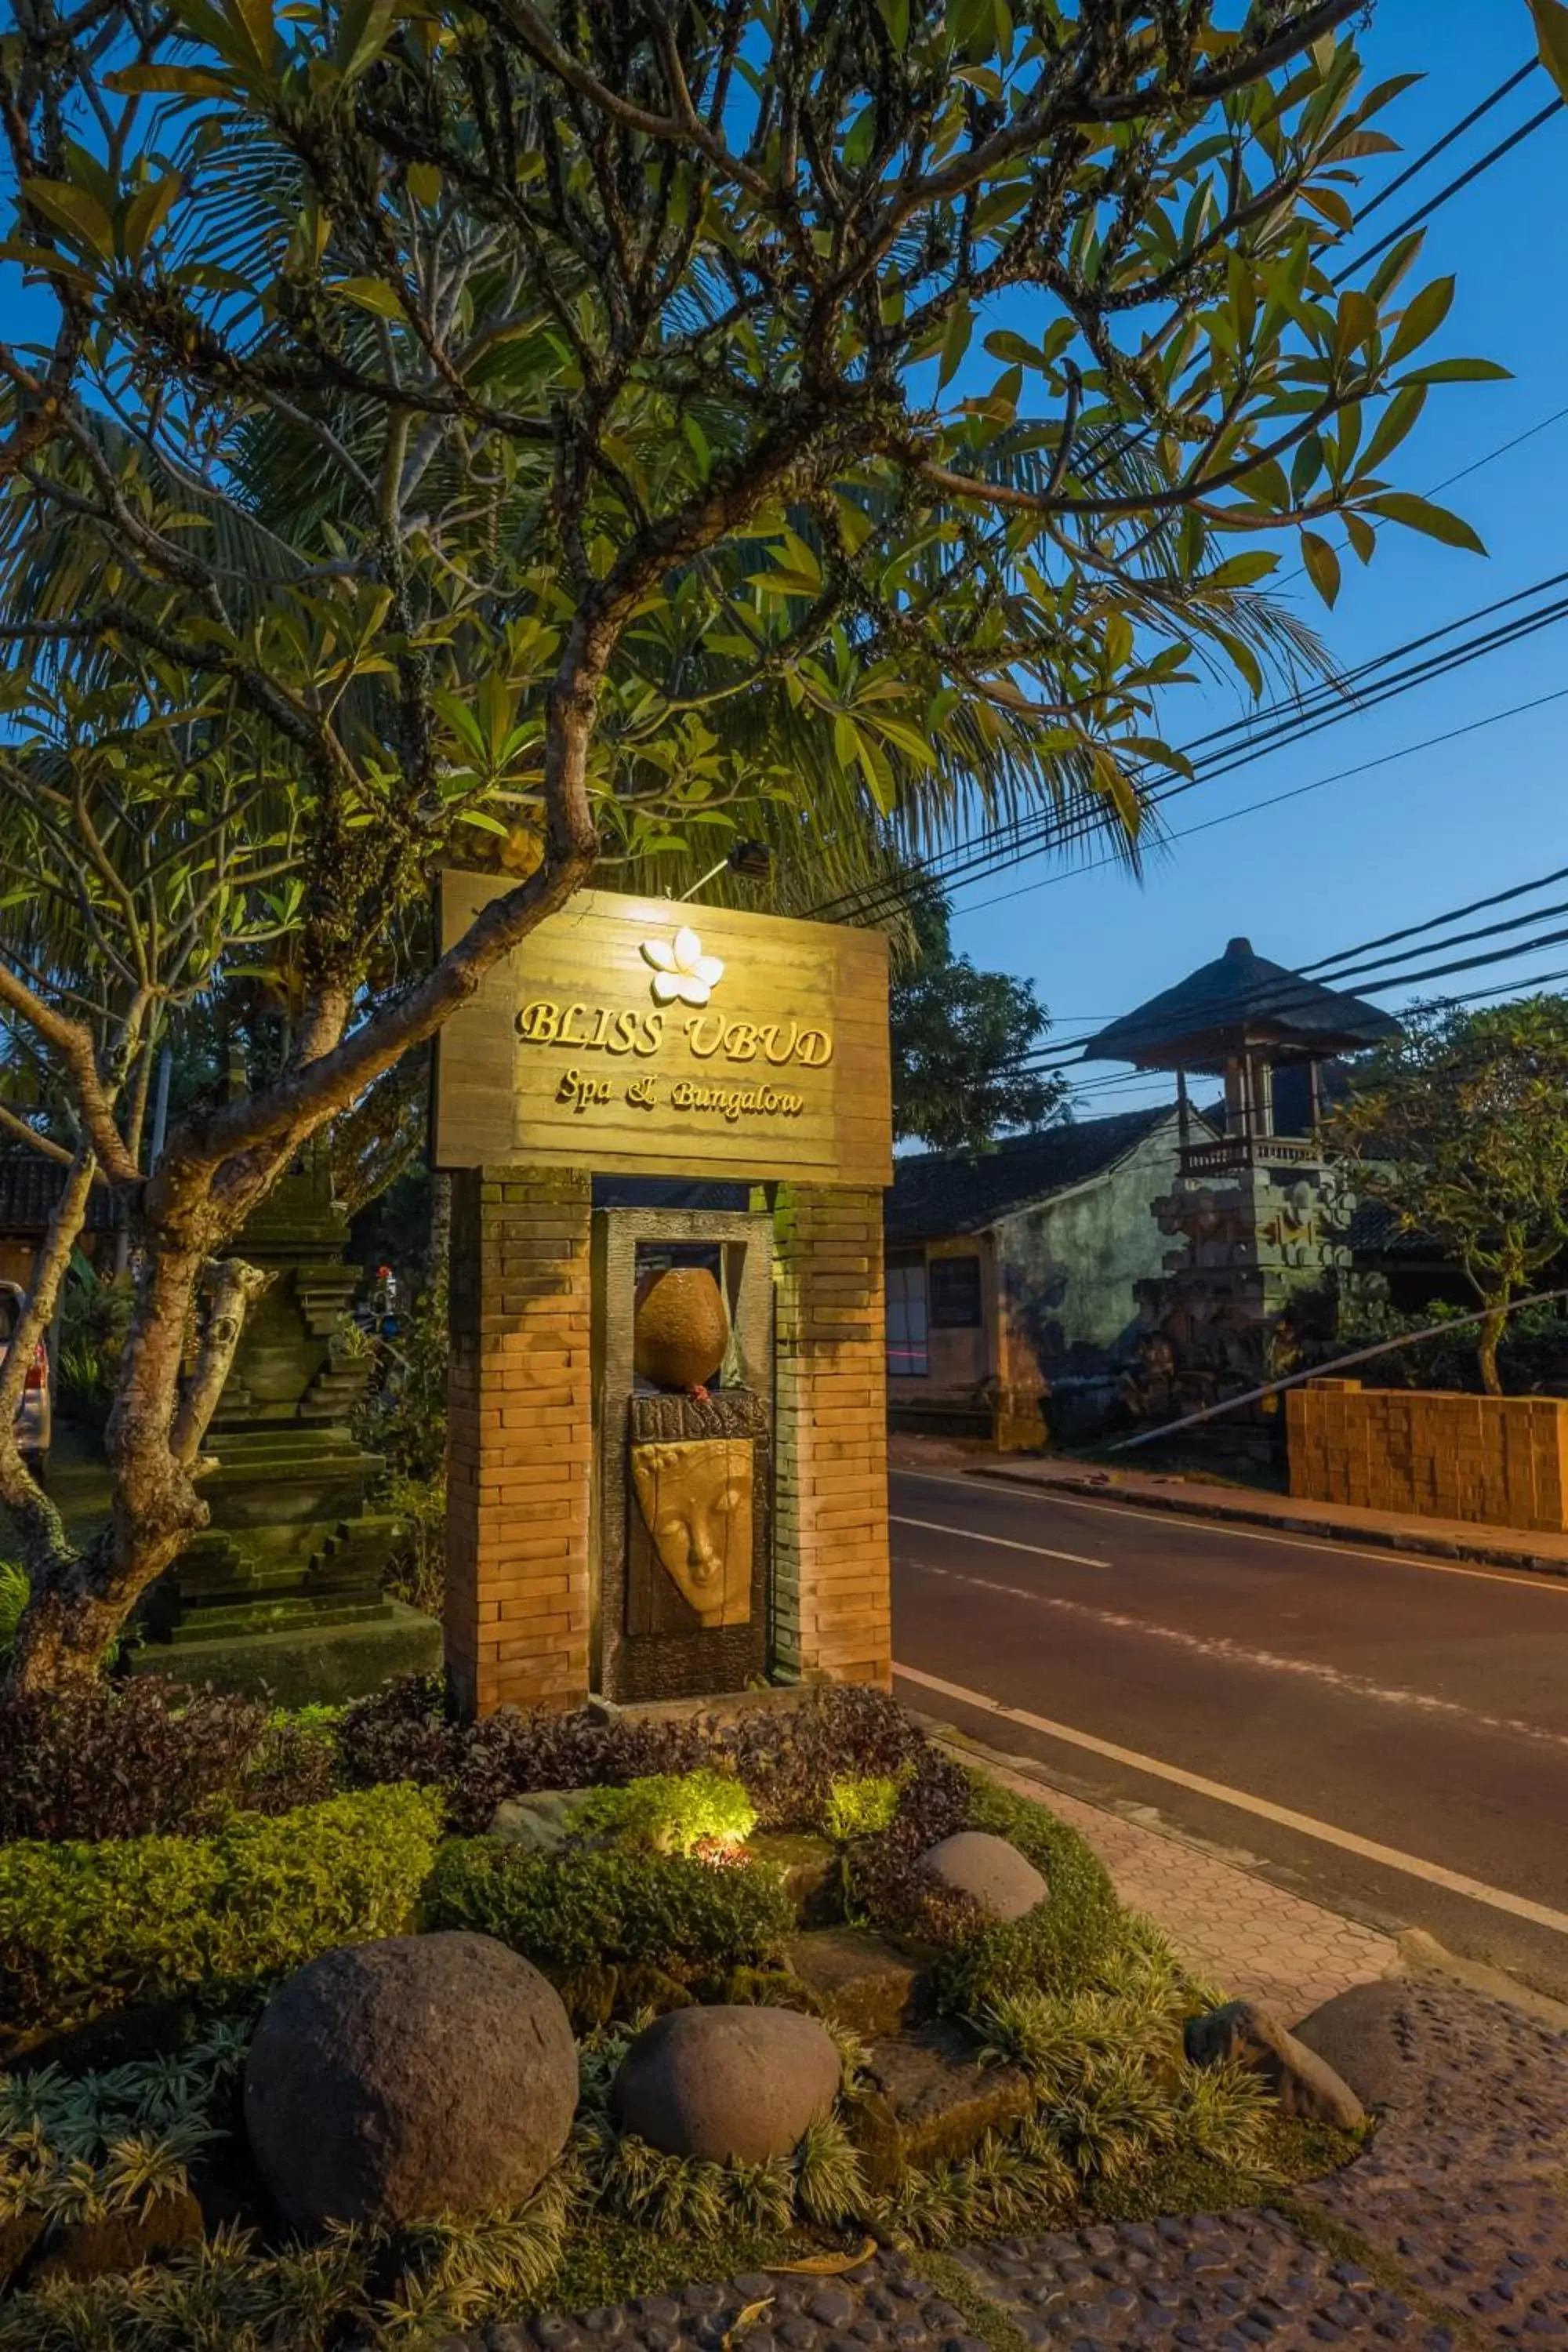 Area and facilities in Bliss Ubud Spa Resort